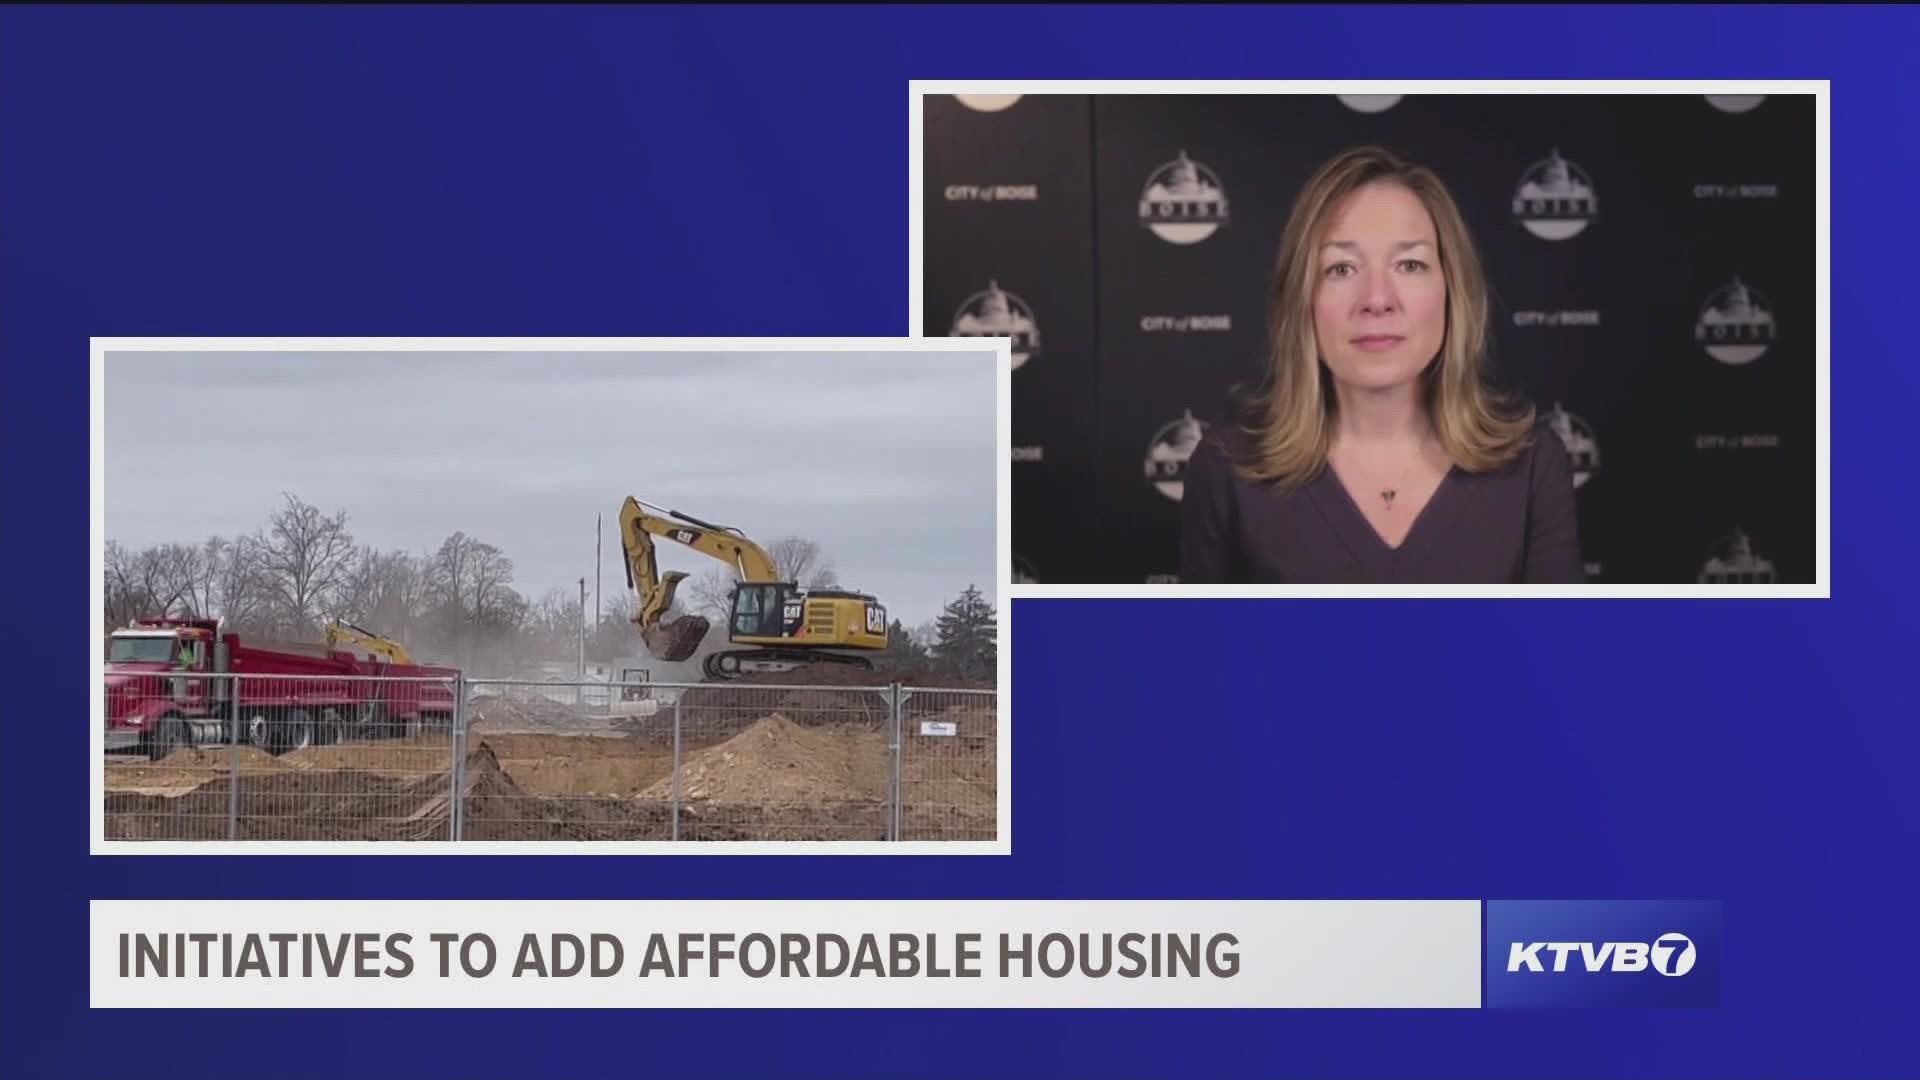 Boise Mayor Lauren McLean discusses the city's projects and initiatives to provide more affordable housing for Boiseans and to house the homeless.